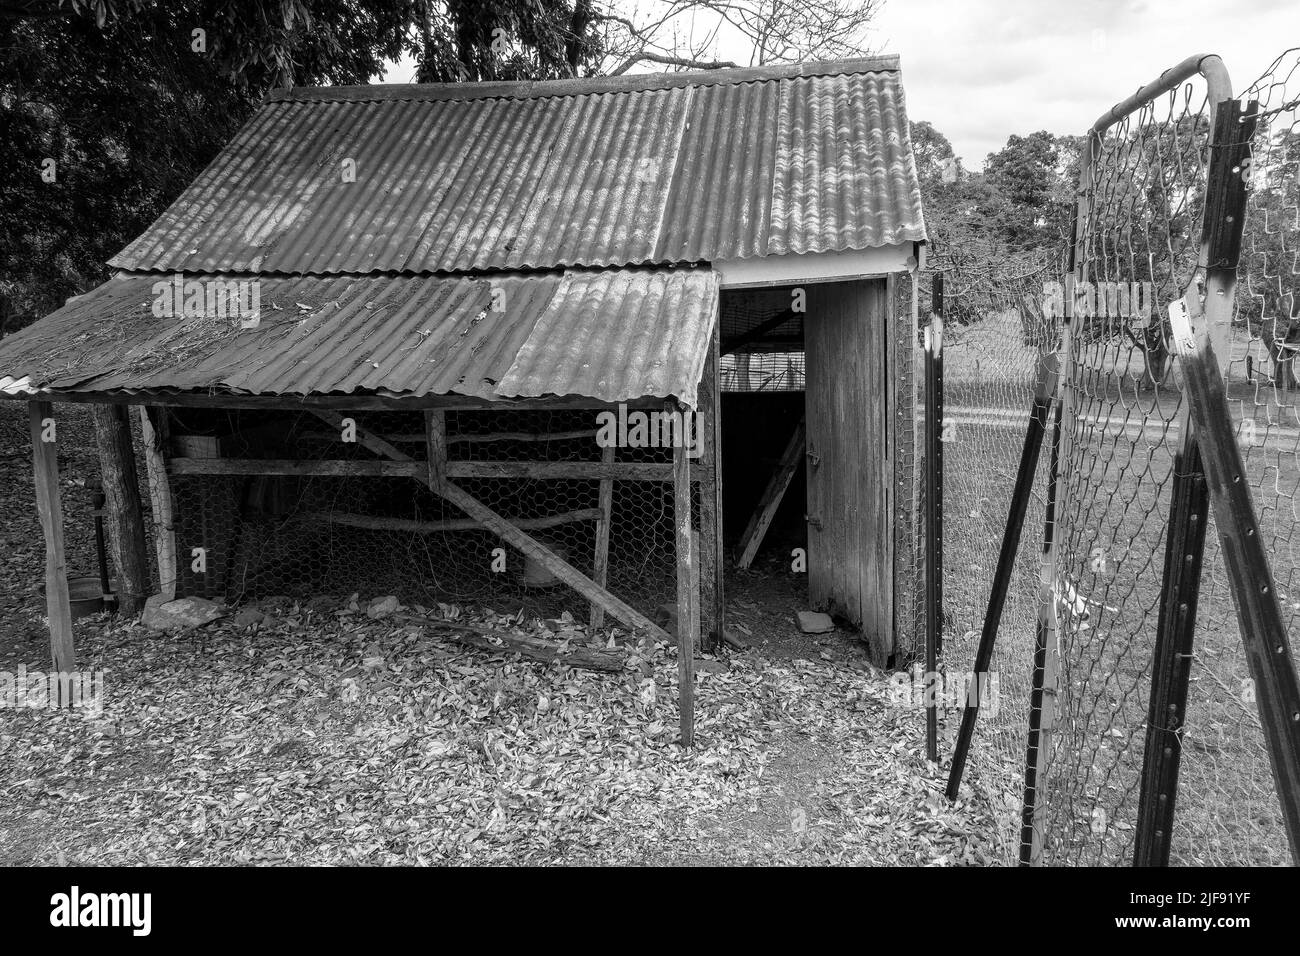 An old dilapidated rusting chicken house fenced with netted wire, empty and no longer in use Stock Photo